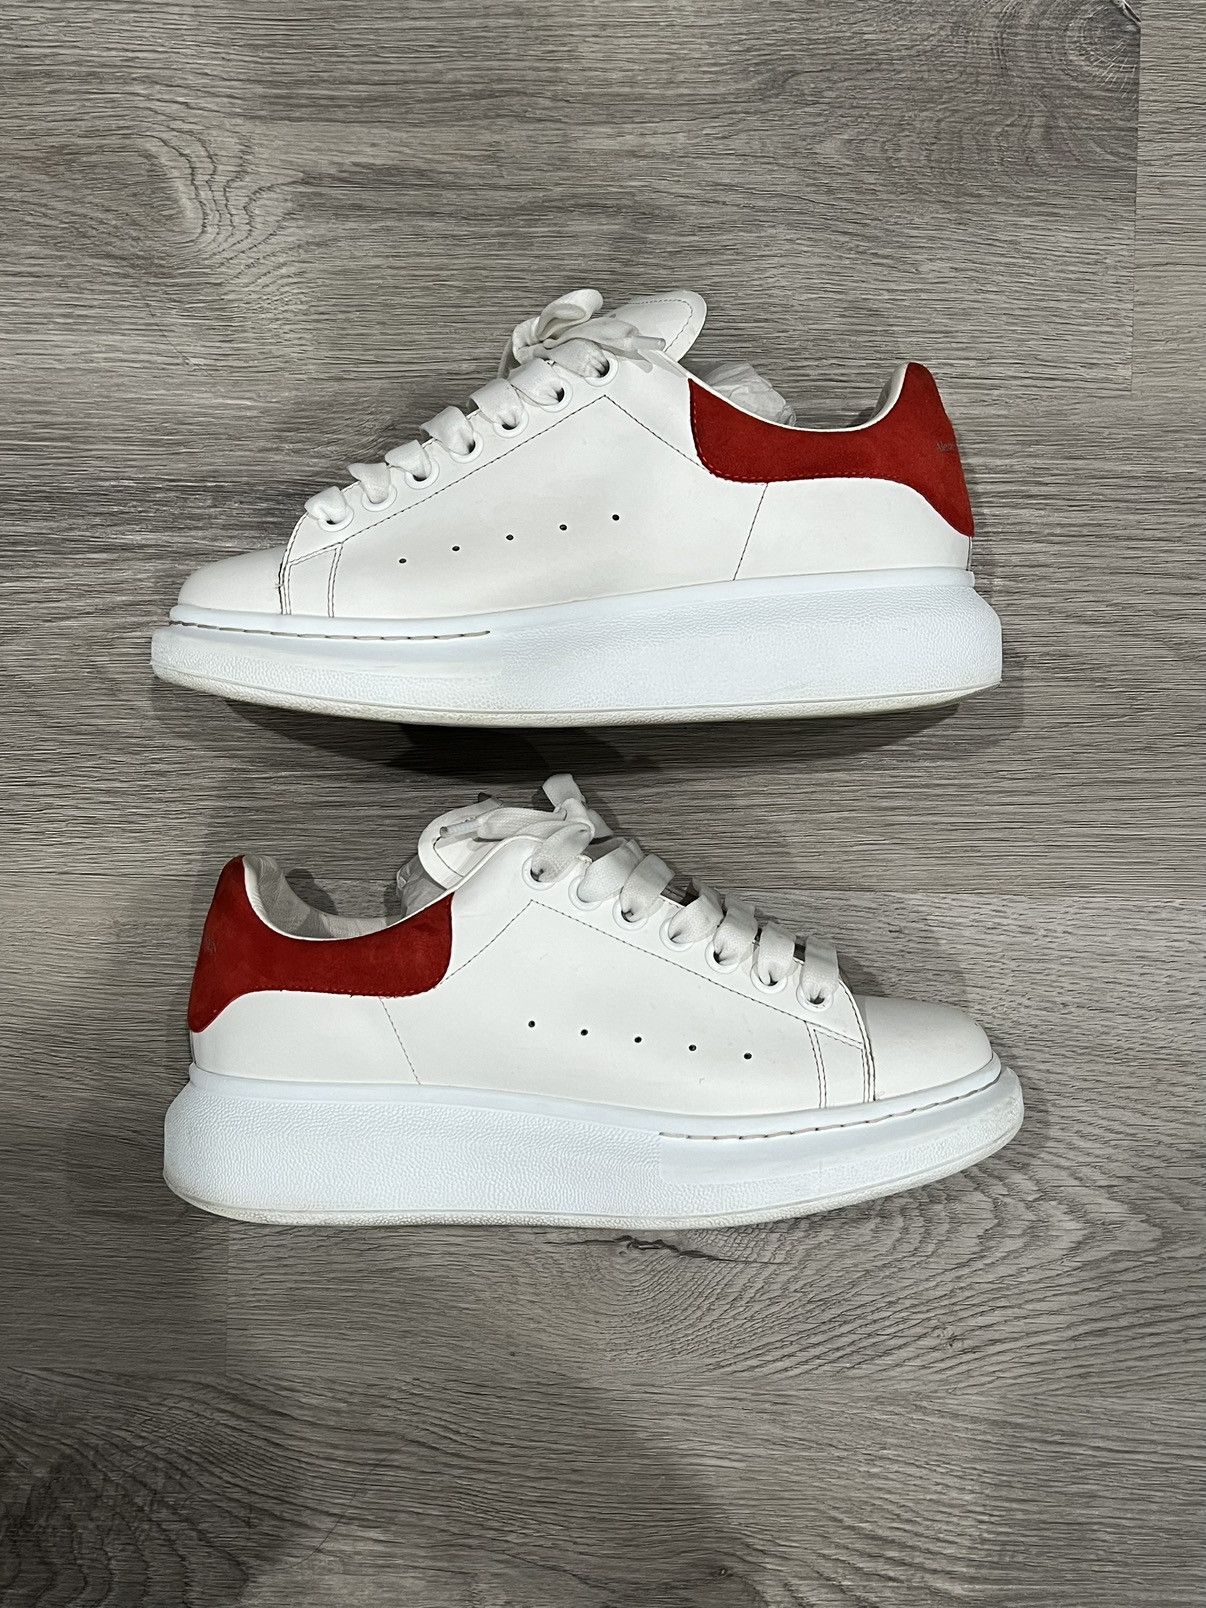 Alexander McQueen Oversized Embroidered Red Sneaker (Review) 